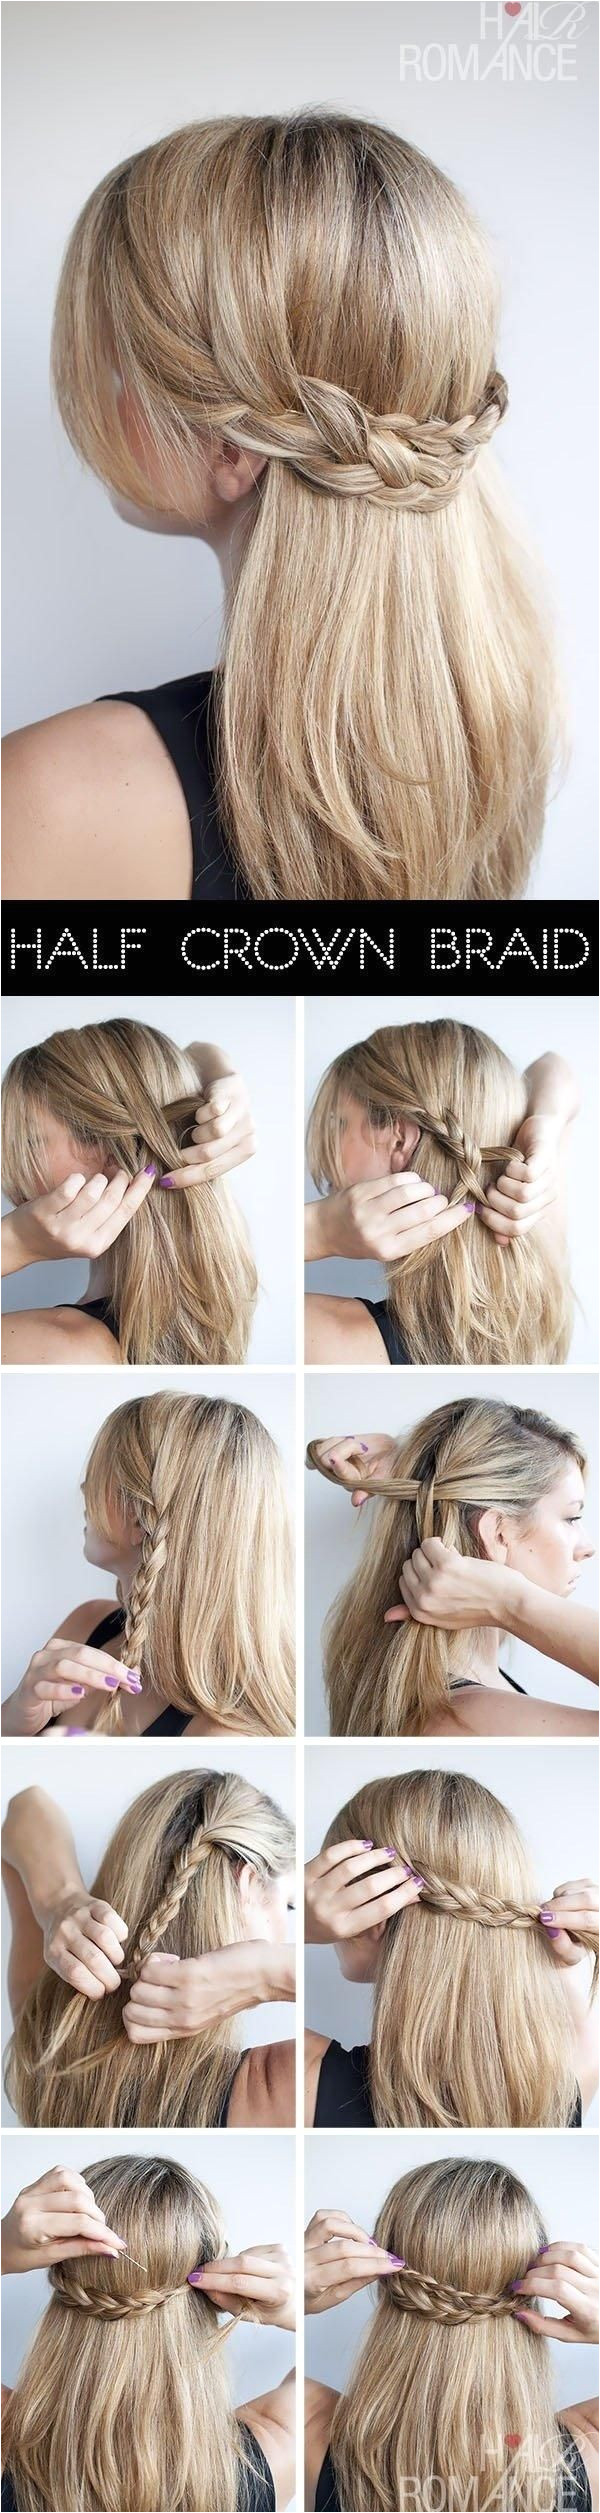 15 Easy No Heat Hairstyles For Dirty Hair Beauty Tips Pinterest